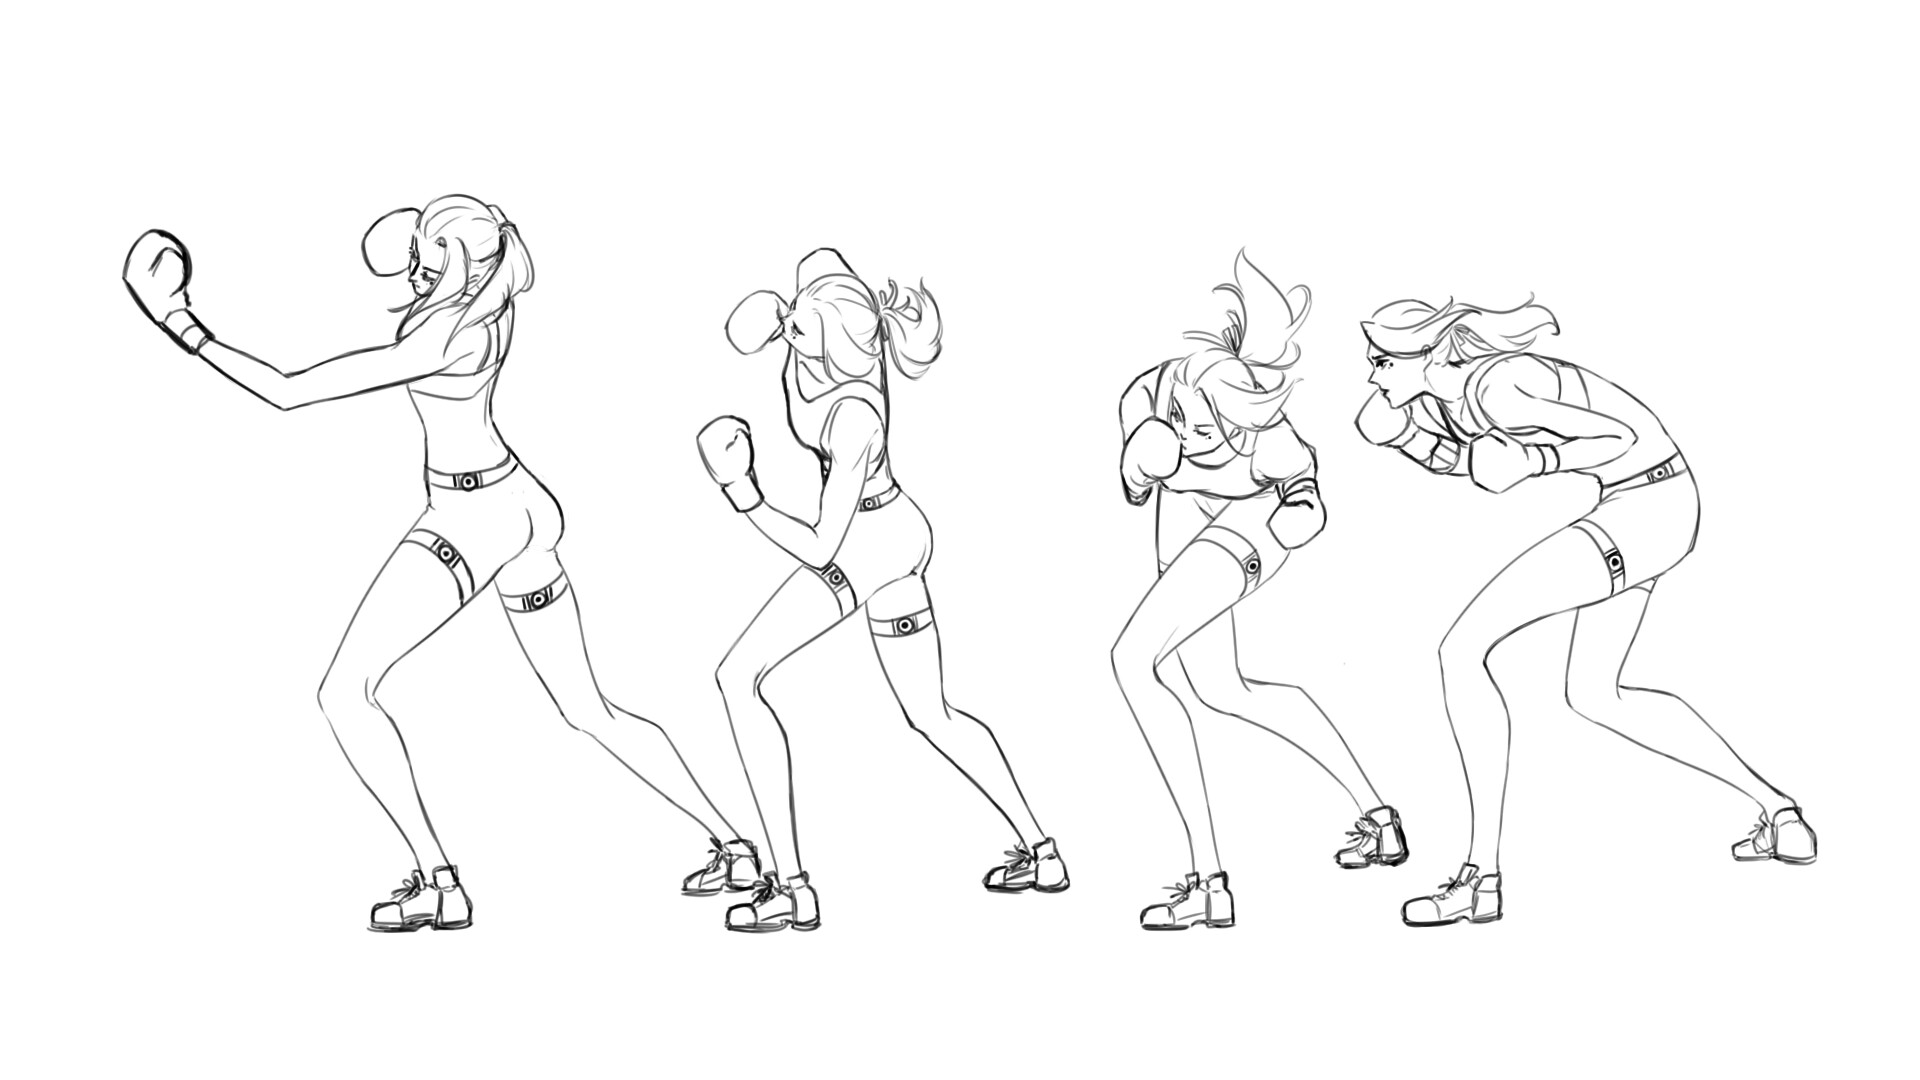 ArtStation - Sequence drawing HW_Boxing